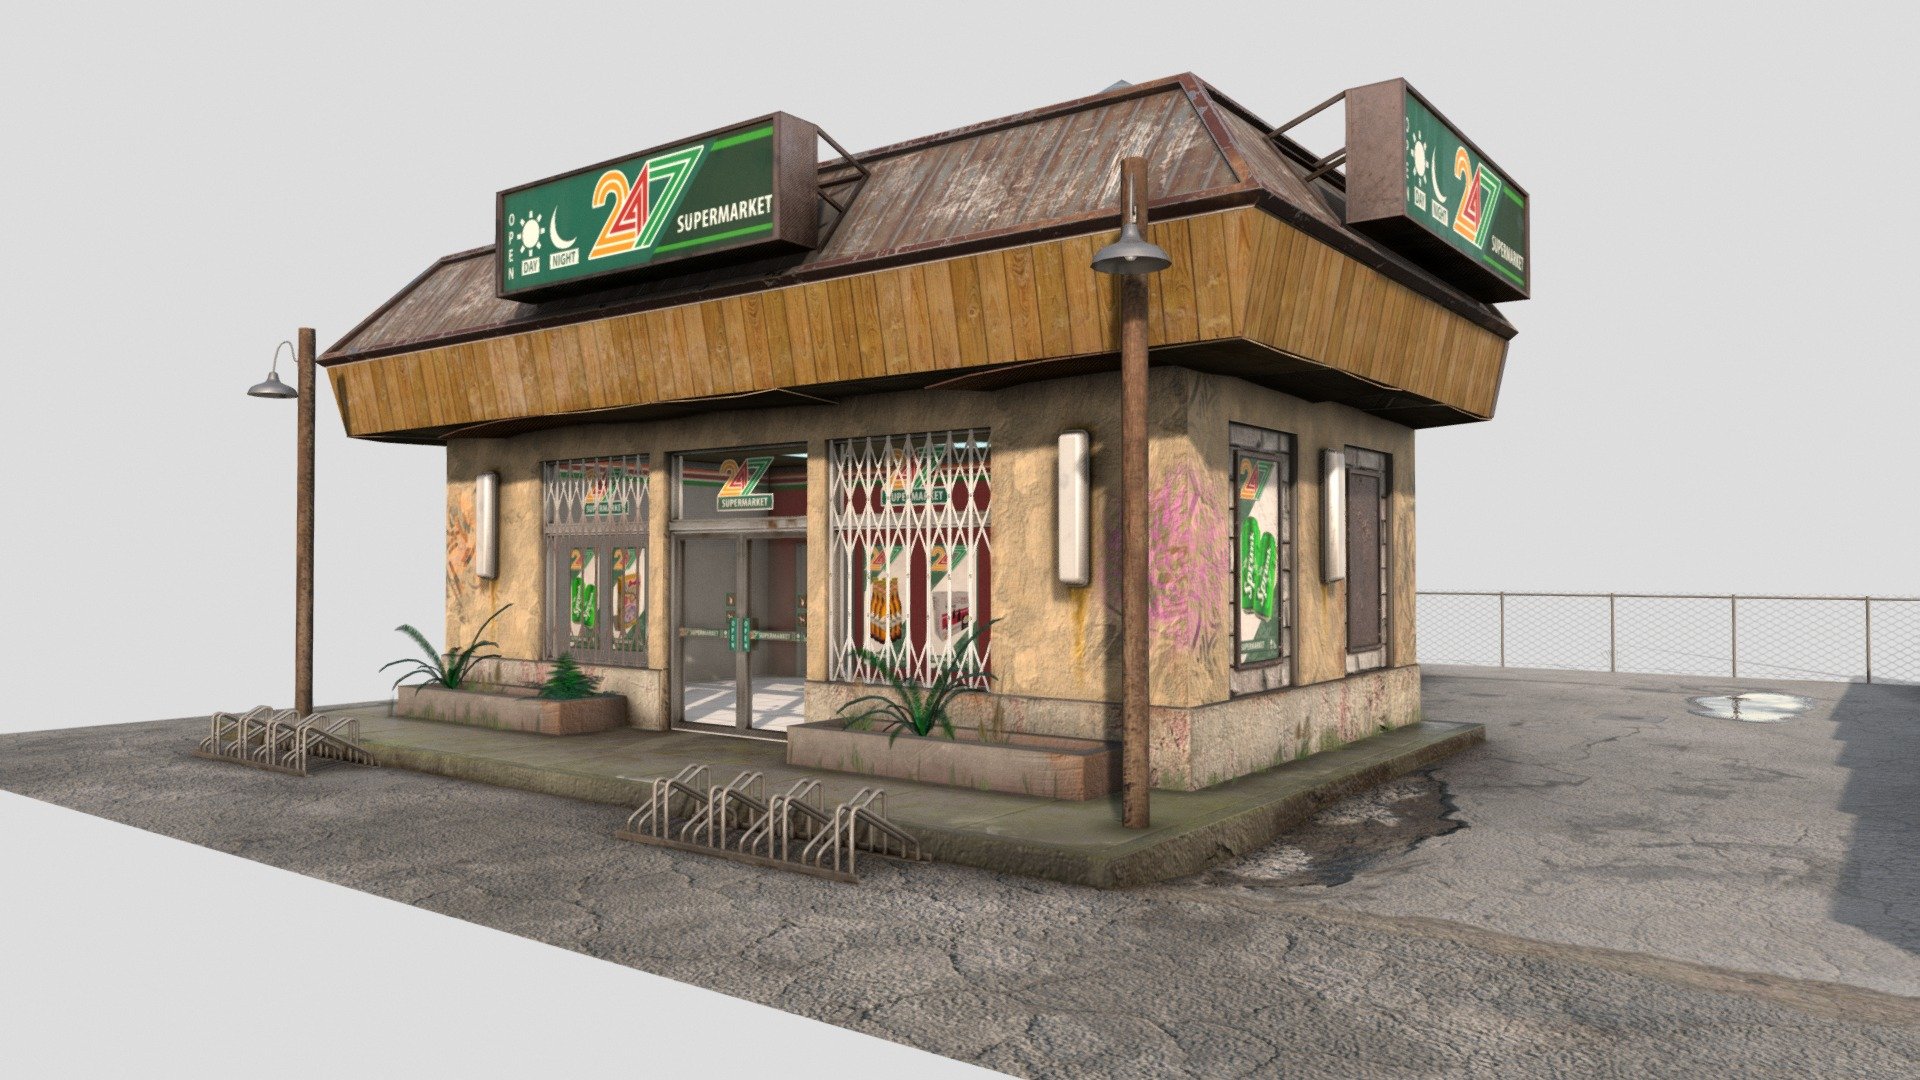 247 Supermarket GTA - Made on Cinema 4D Substance Painter and Photoshop. -&gt; 4K Texture ( Completely made by myself ) This model is not free of rights You must inform me of your usage. By Max - Contact Discord : max5532 - 247 Supermarket (Sandy Shores) - Type GTA V - Download Free 3D model by Max (@Max-5532) 3d model